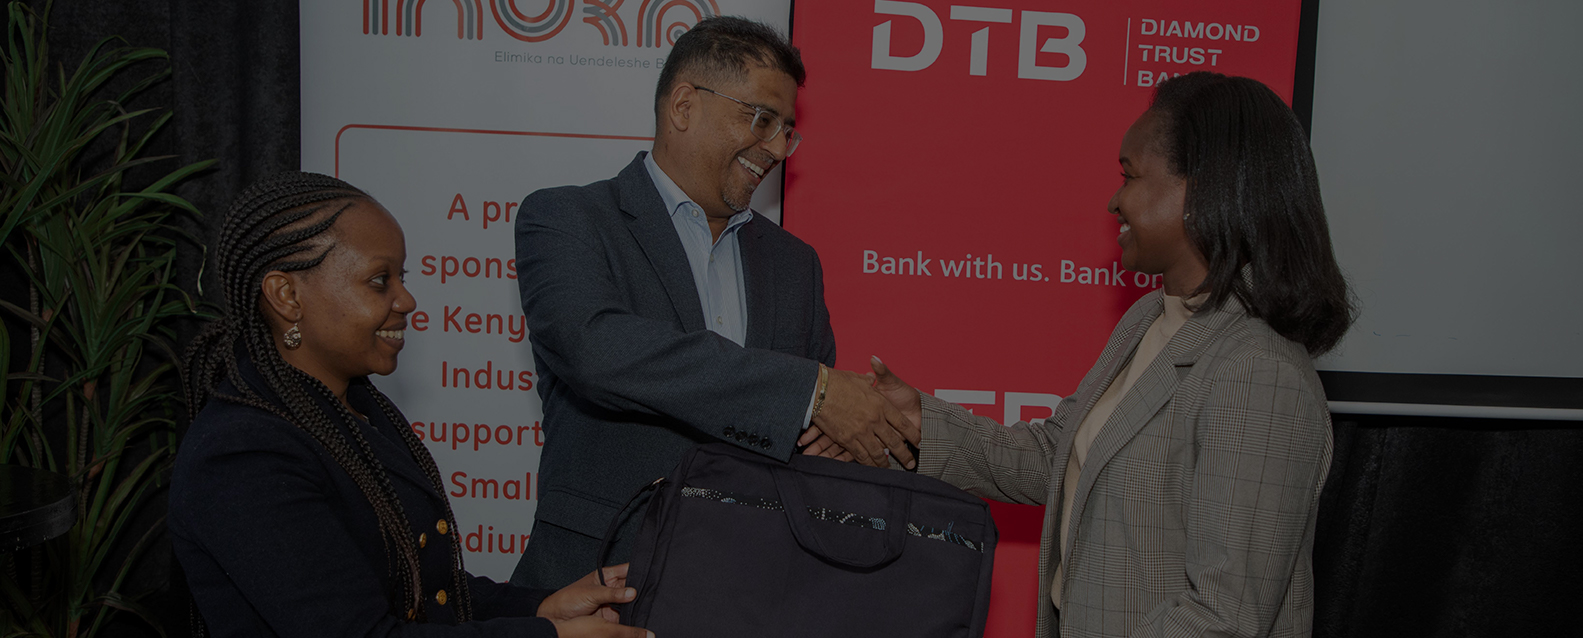 DTB empowers MSMEs